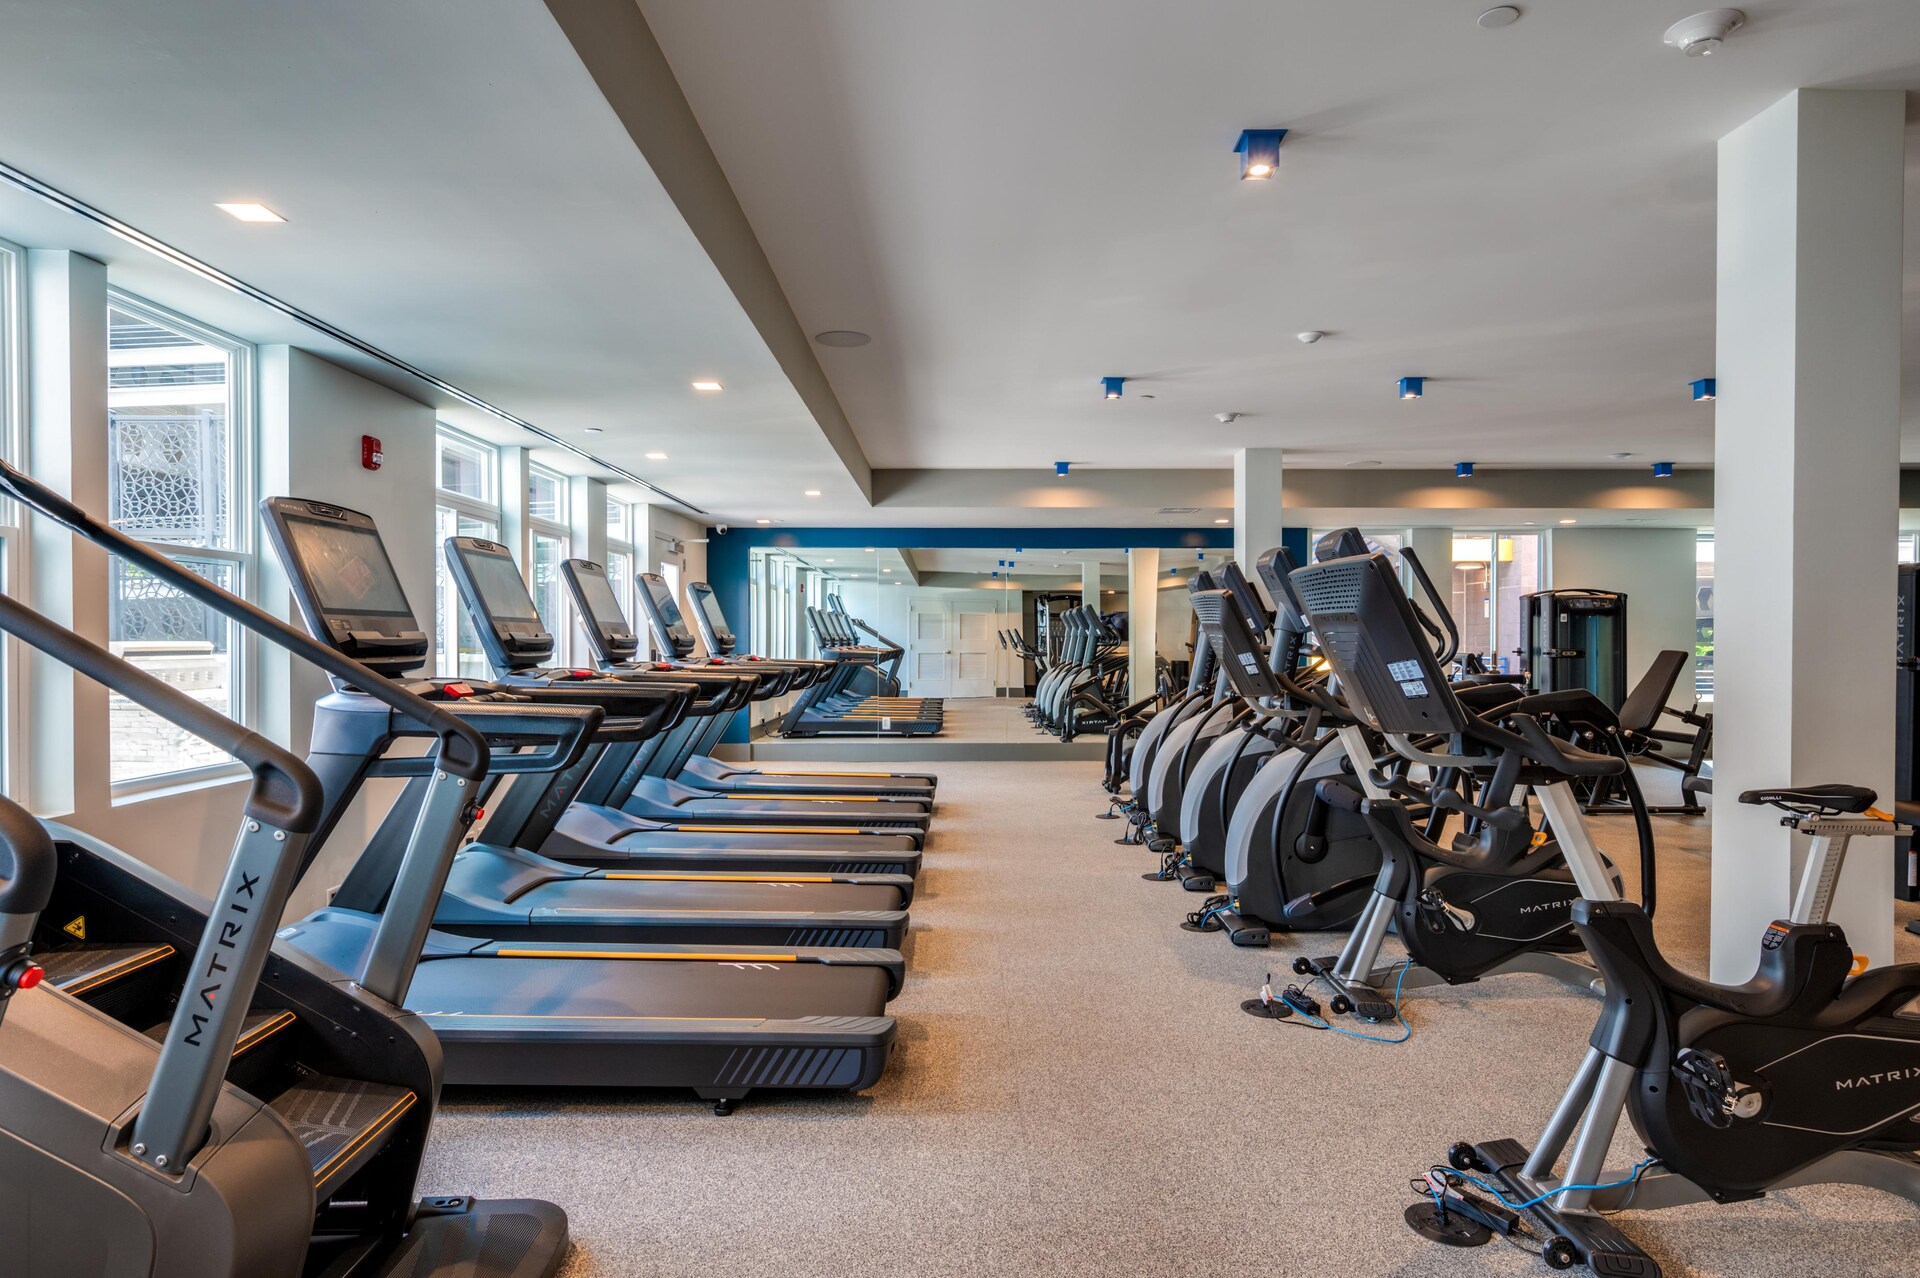 Another view of the fitness room with cardio machines.